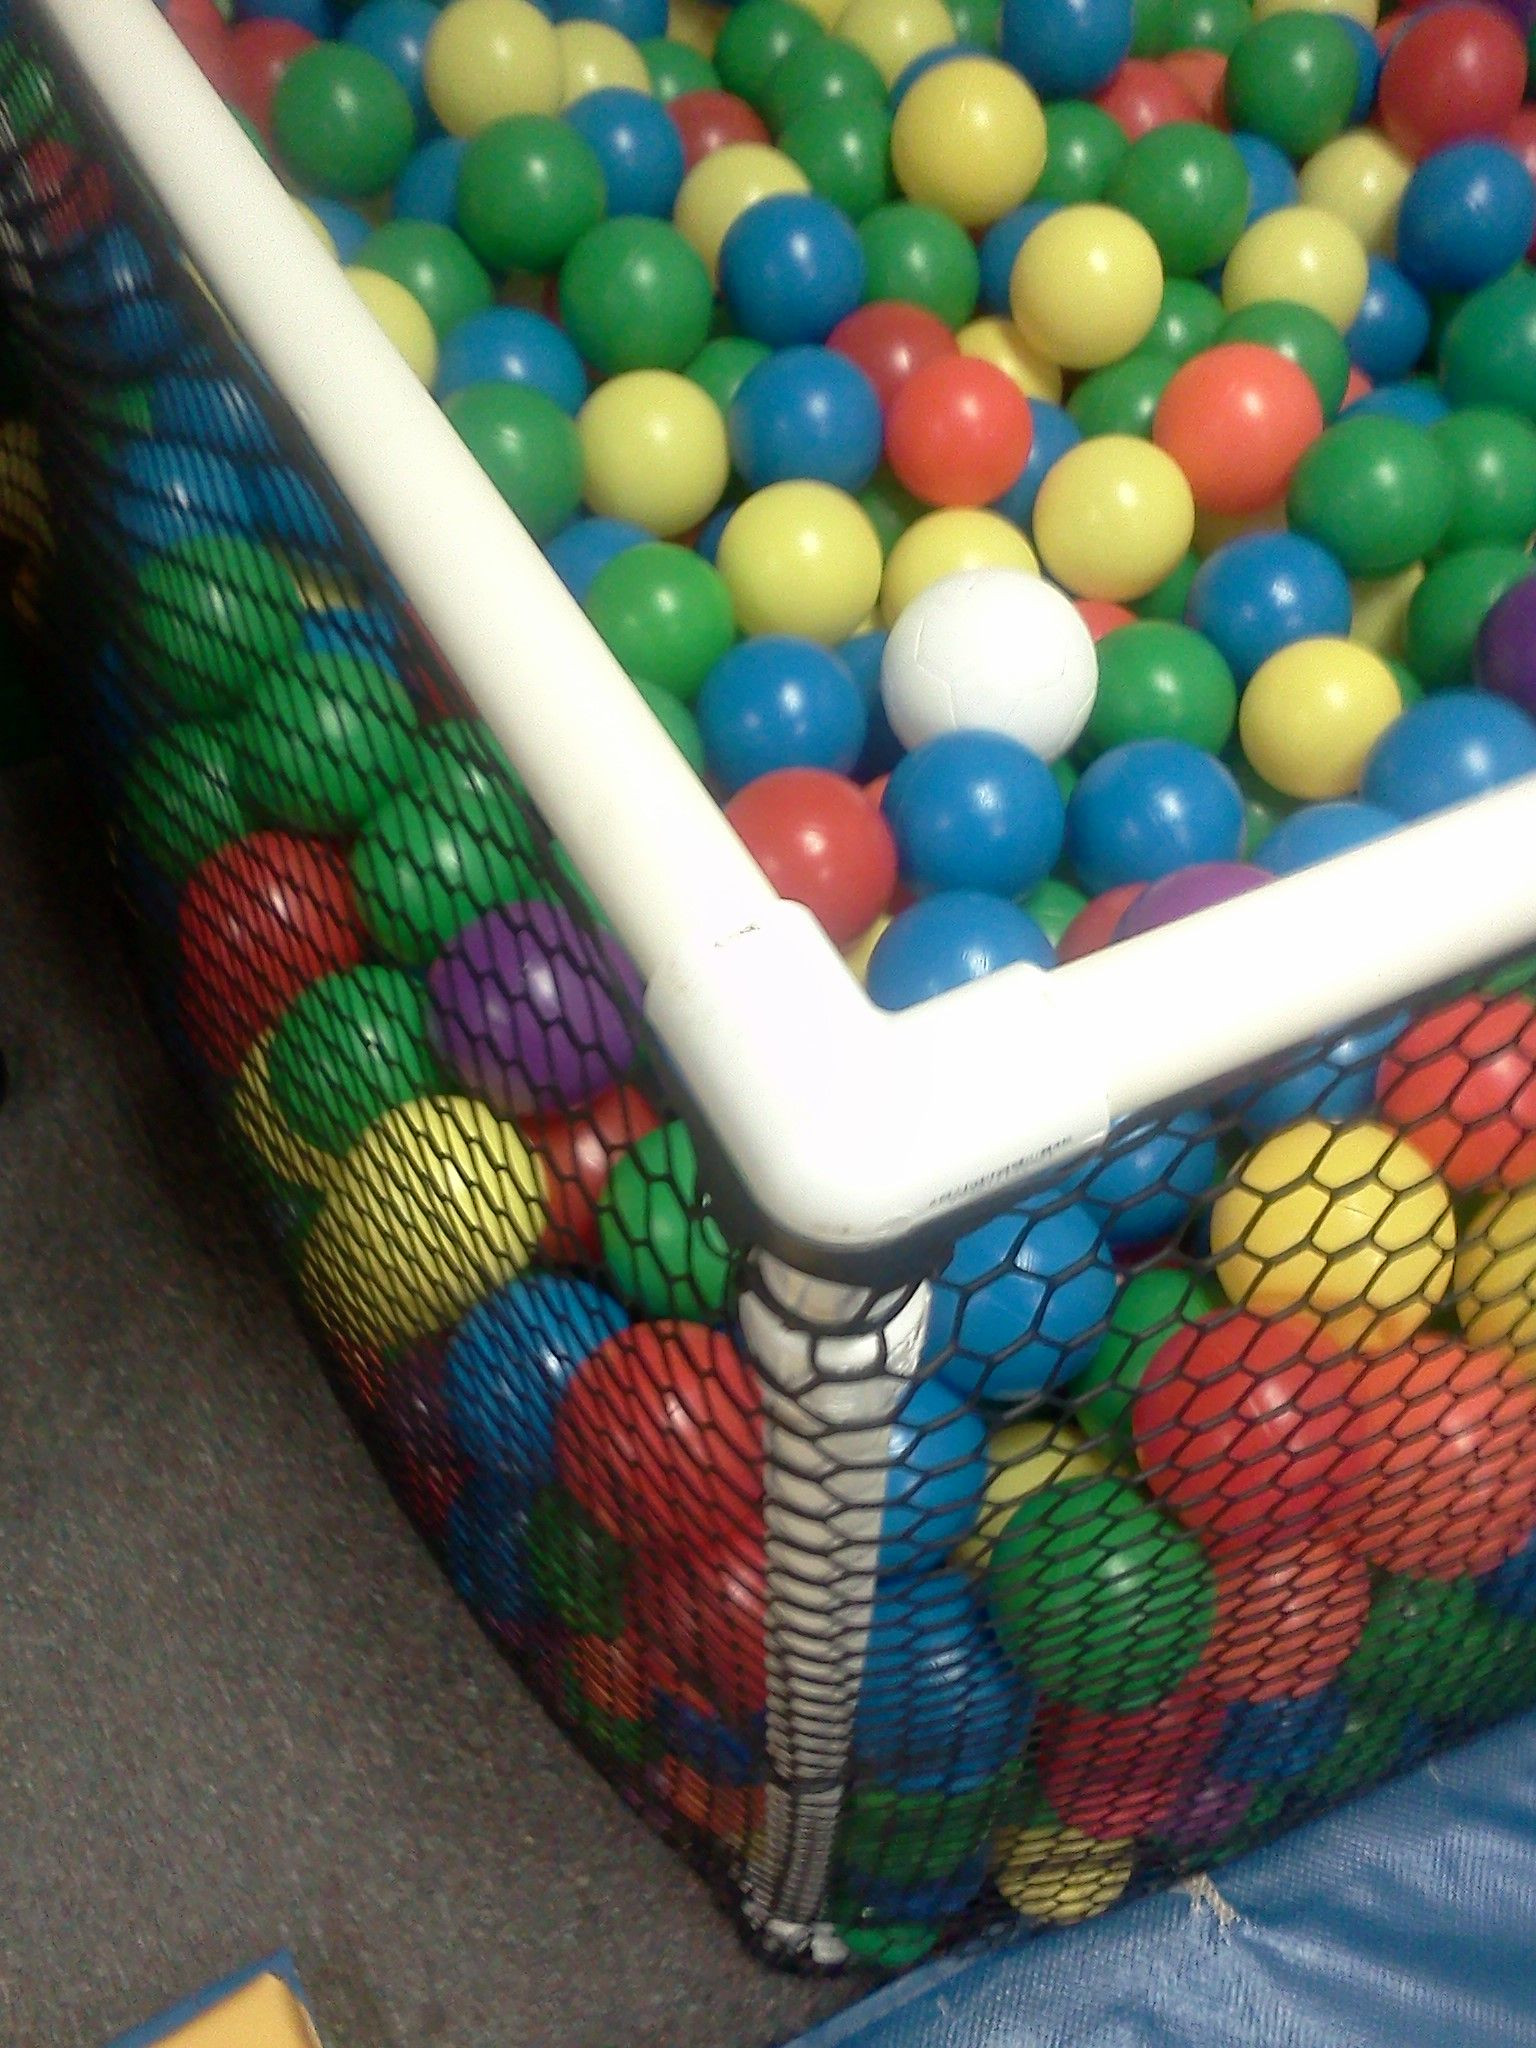 DIY Ball Pit For Toddlers
 Homemade ball pit under $100 without the balls and under